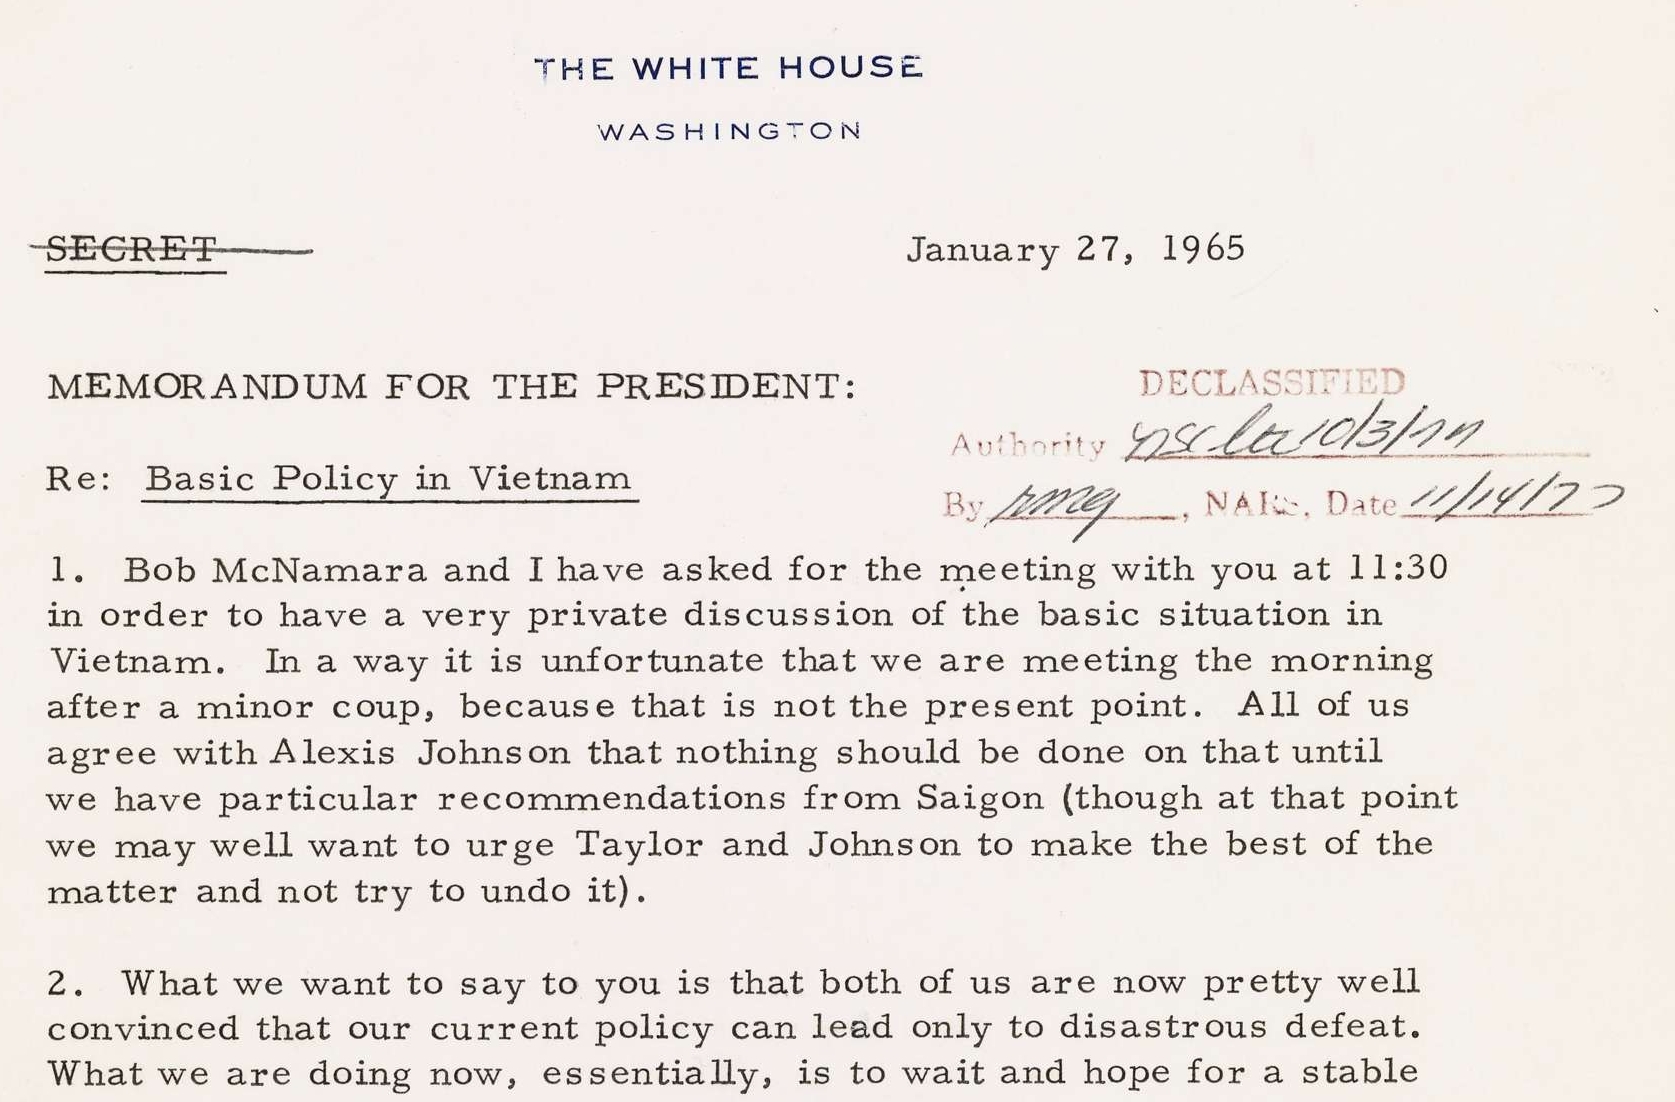 “Fork in the Road” Memo from McGeorge Bundy to President Johnson